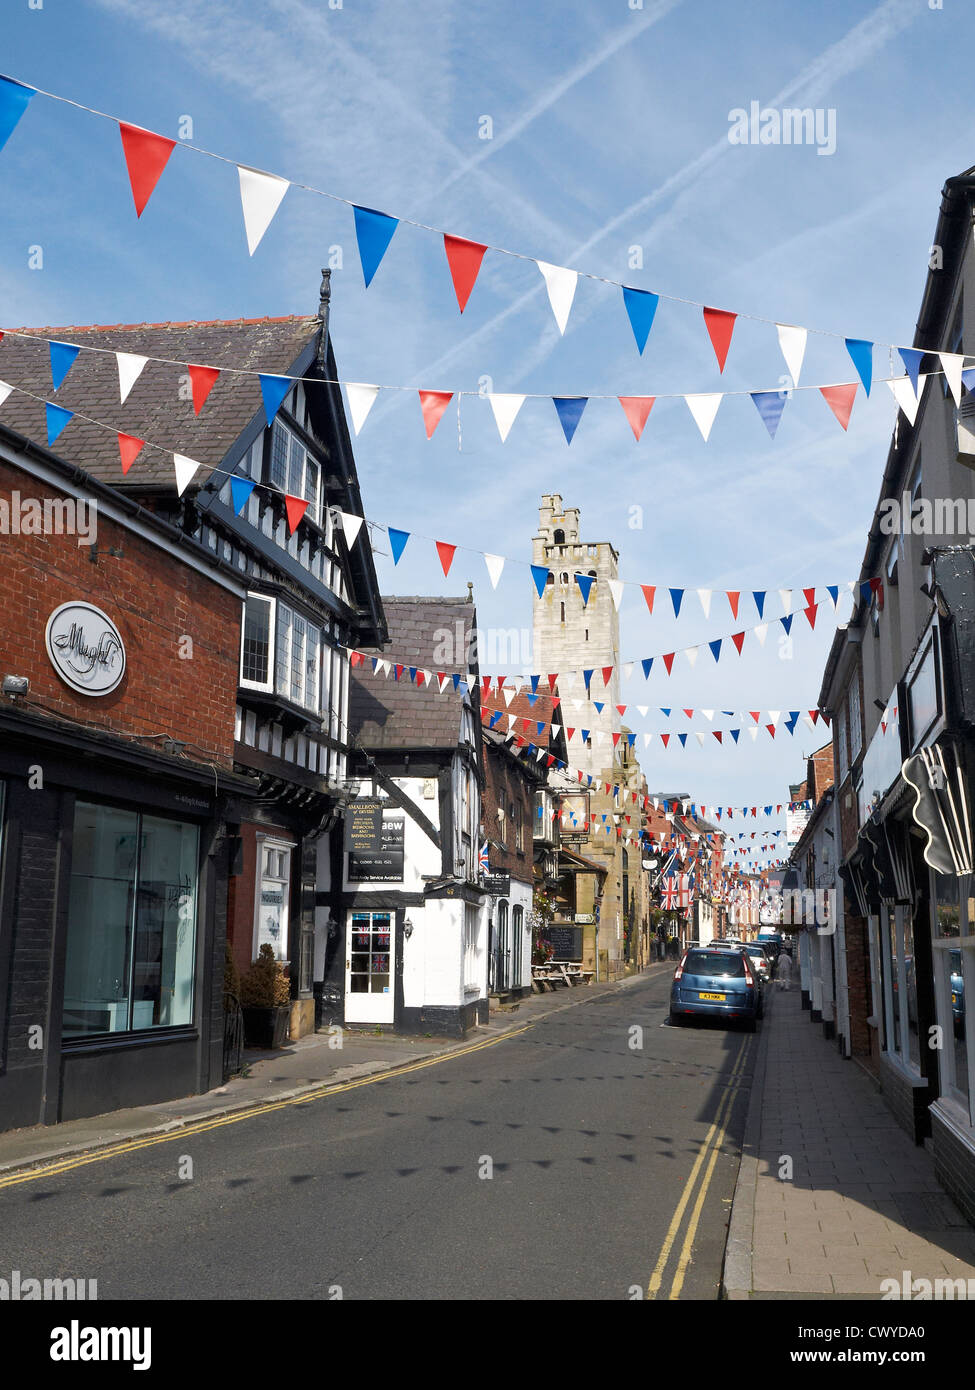 View into King Street Knutsford Cheshire UK Stock Photo